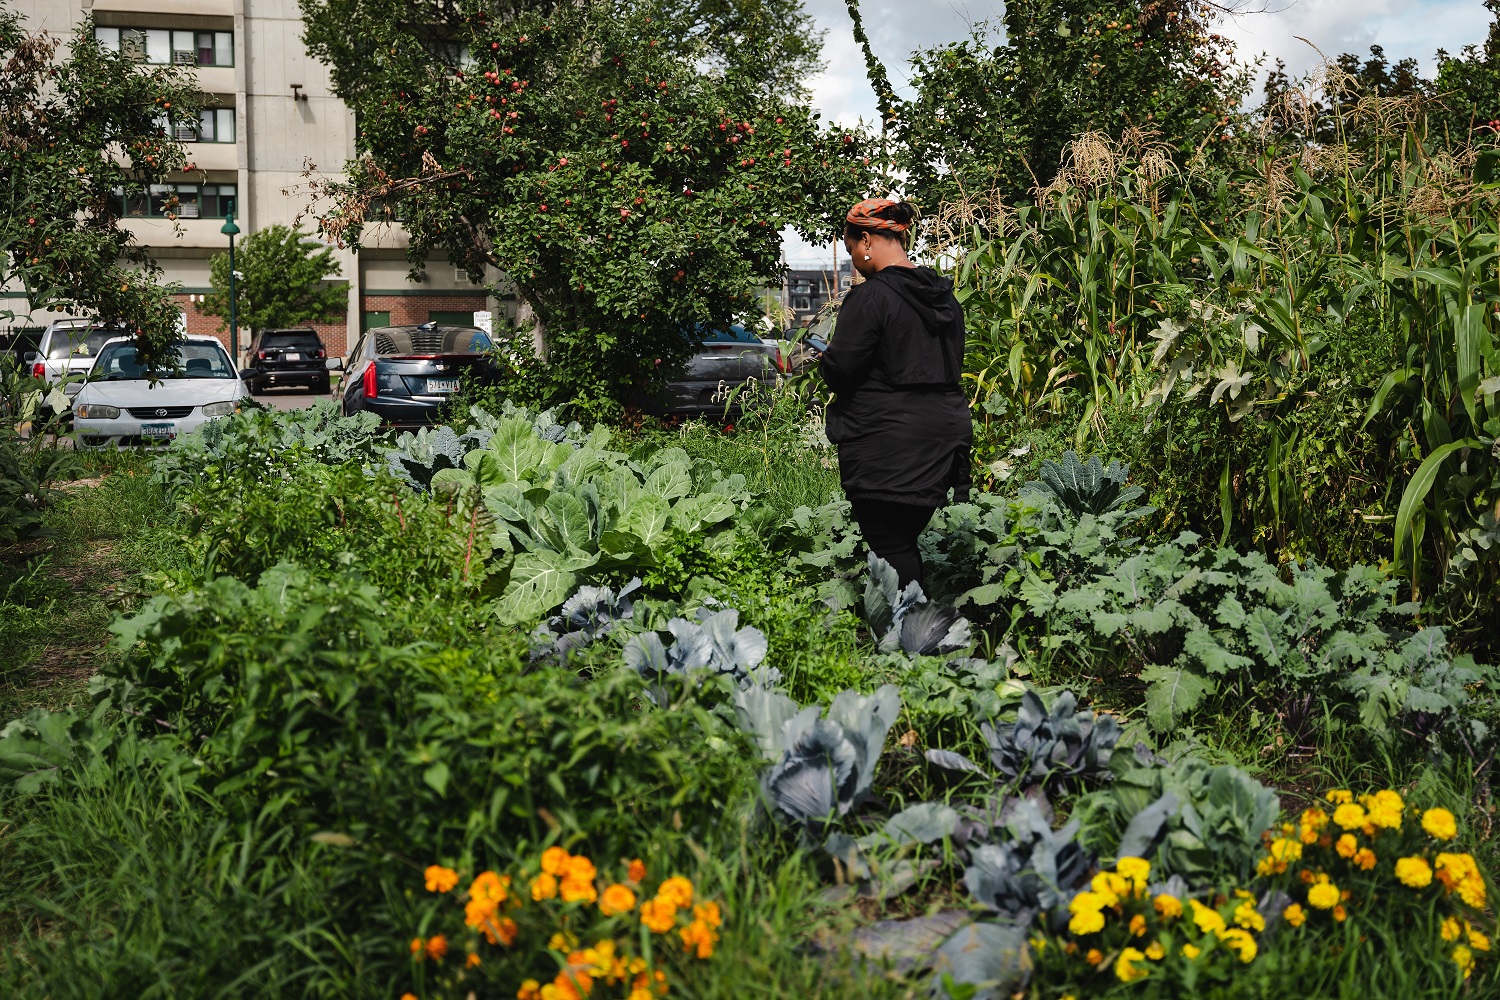 woman working in an urban garden; Source- Minnesota Department of Agriculture